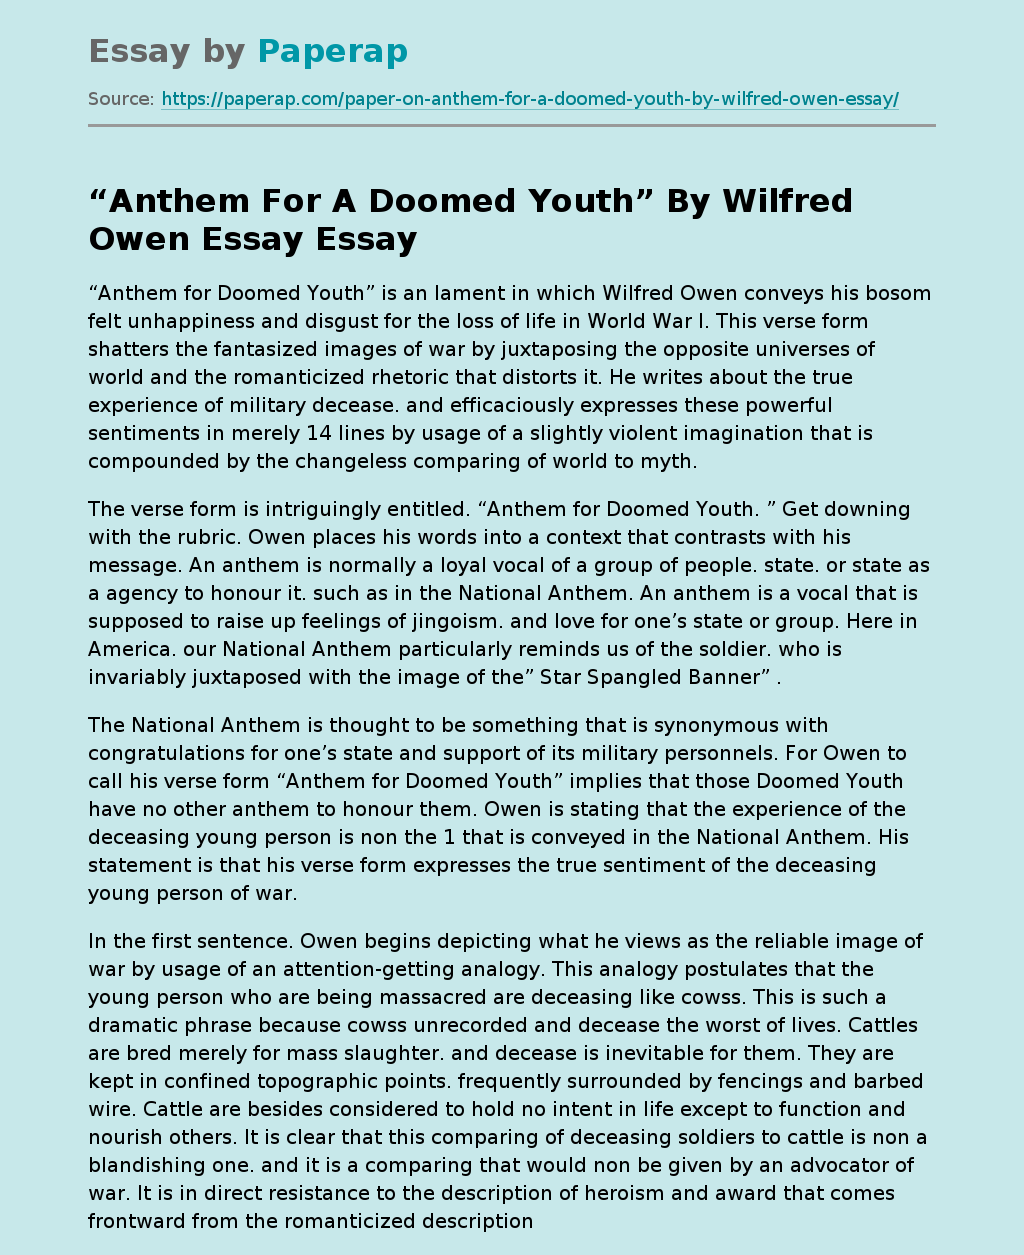 Anthem For A Doomed Youth By Wilfred Owen